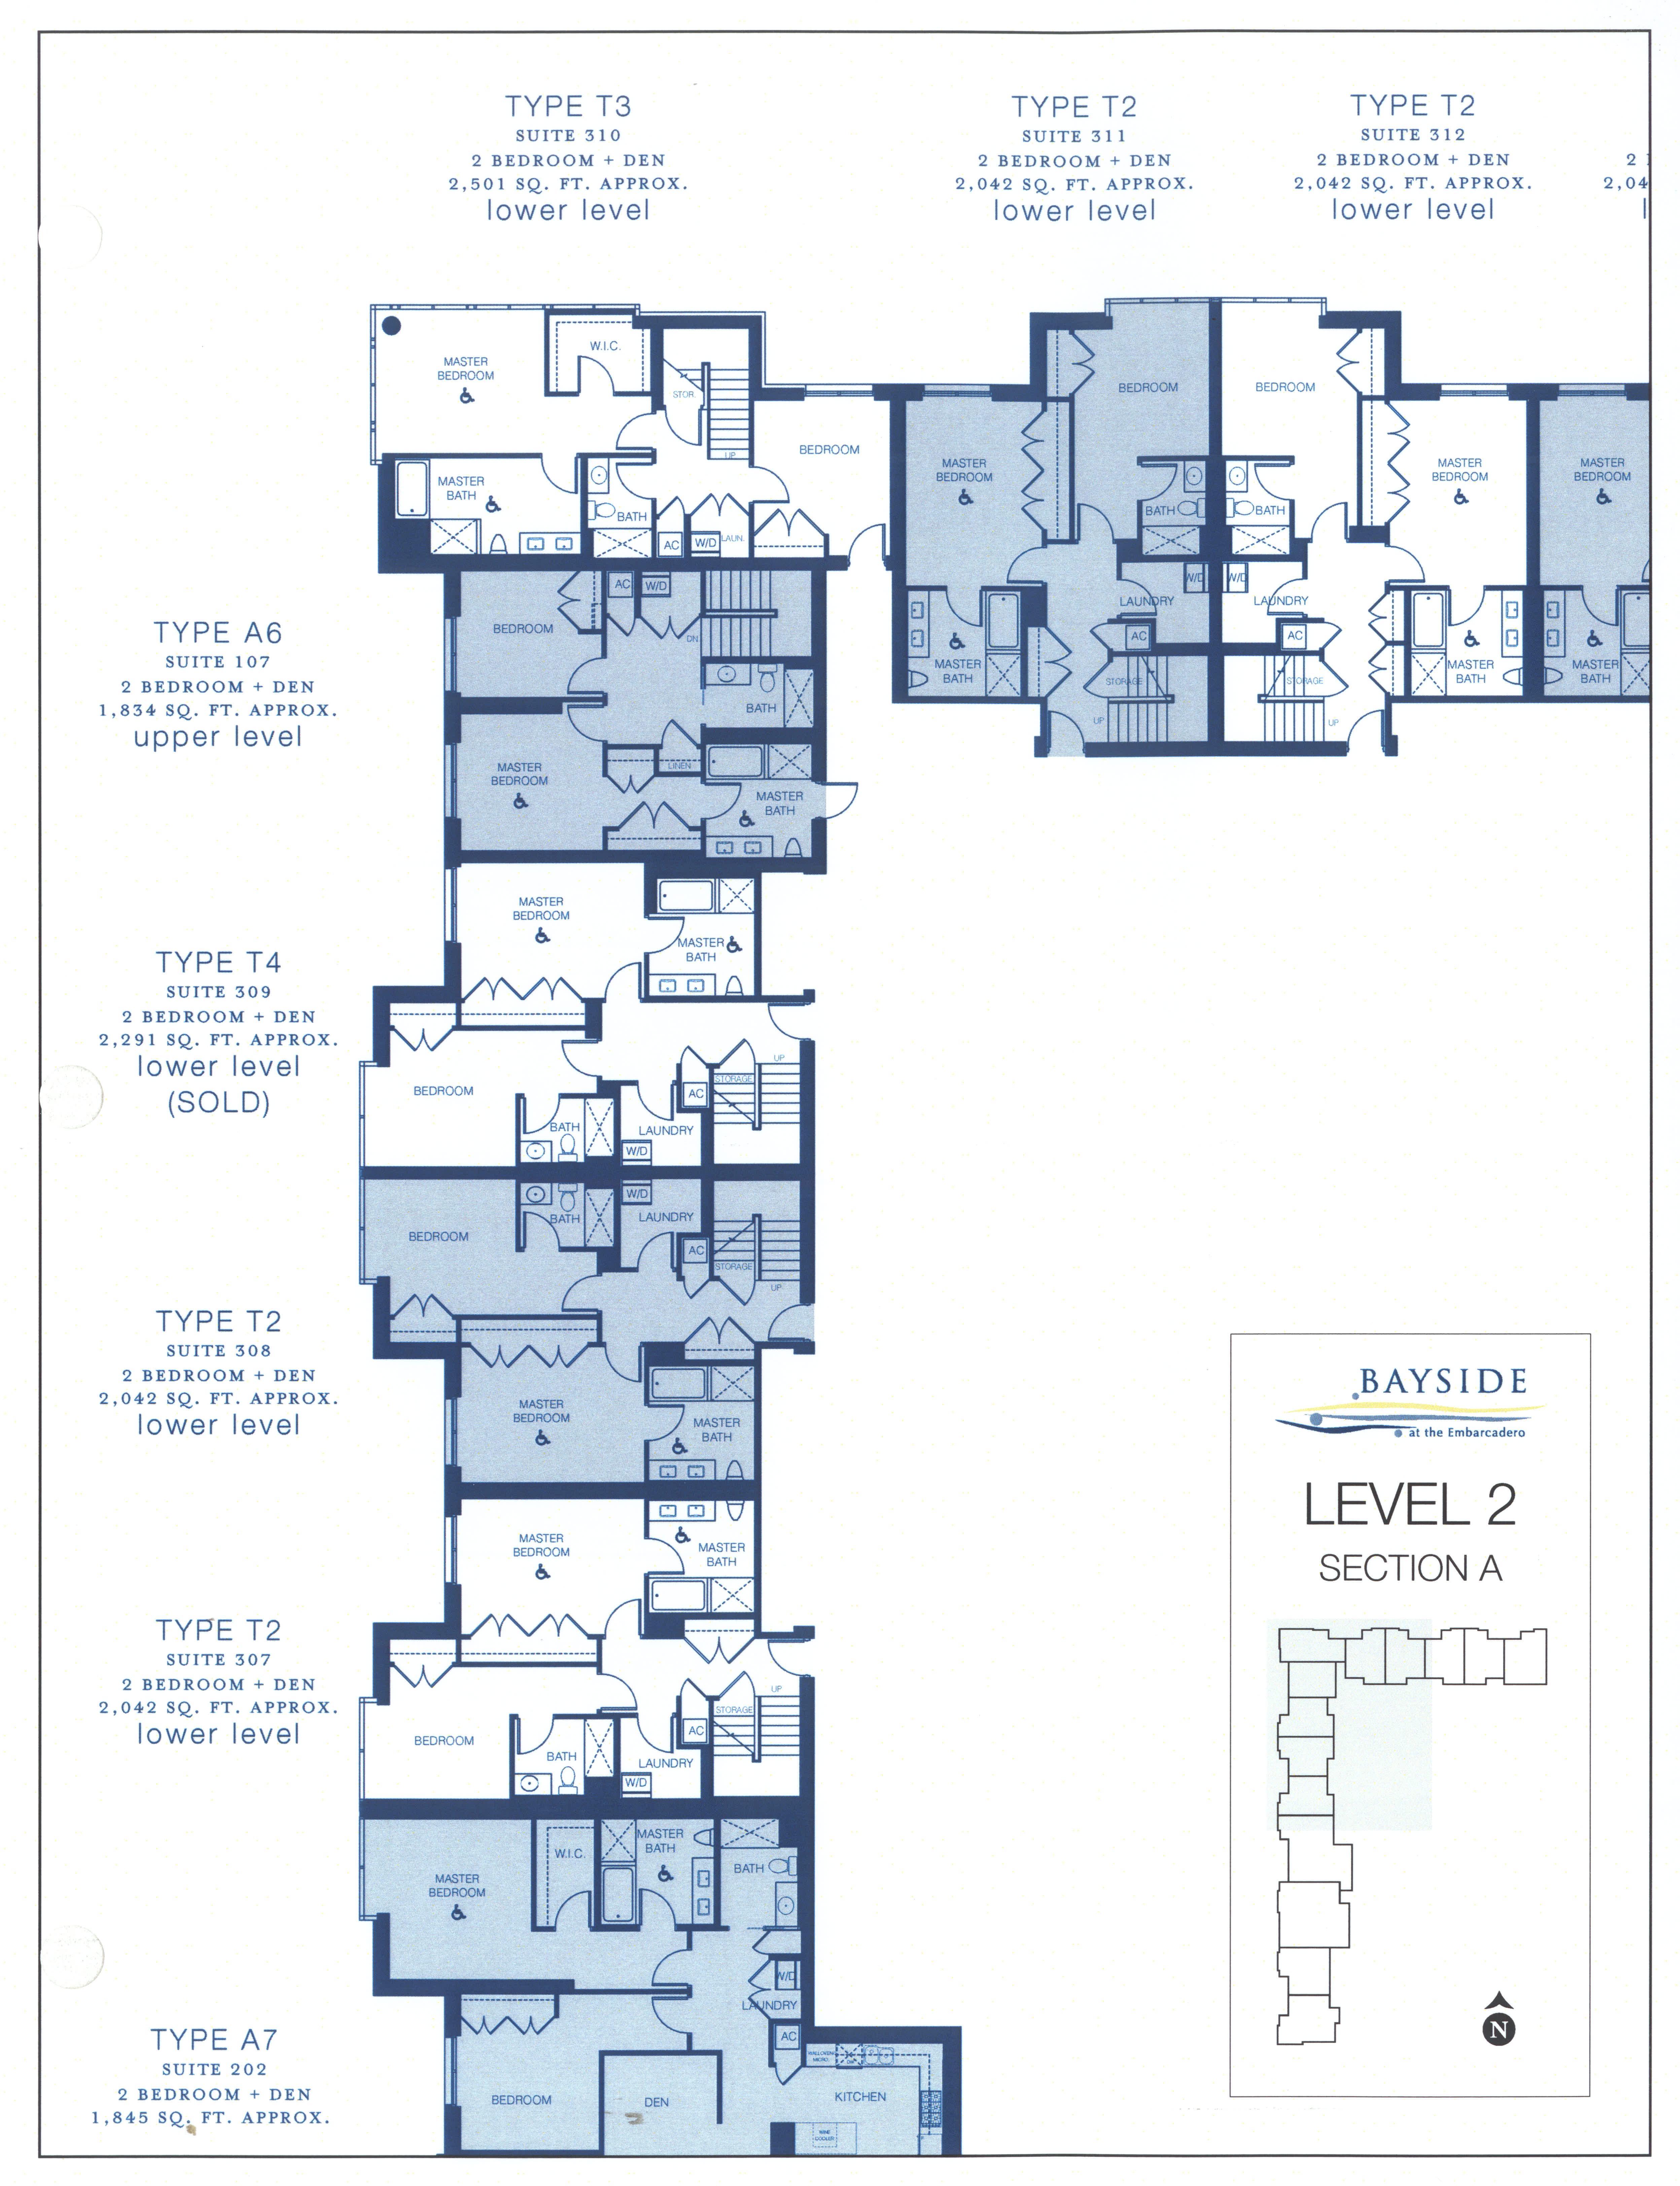 Bayside Floor Plan Level 2 Section A